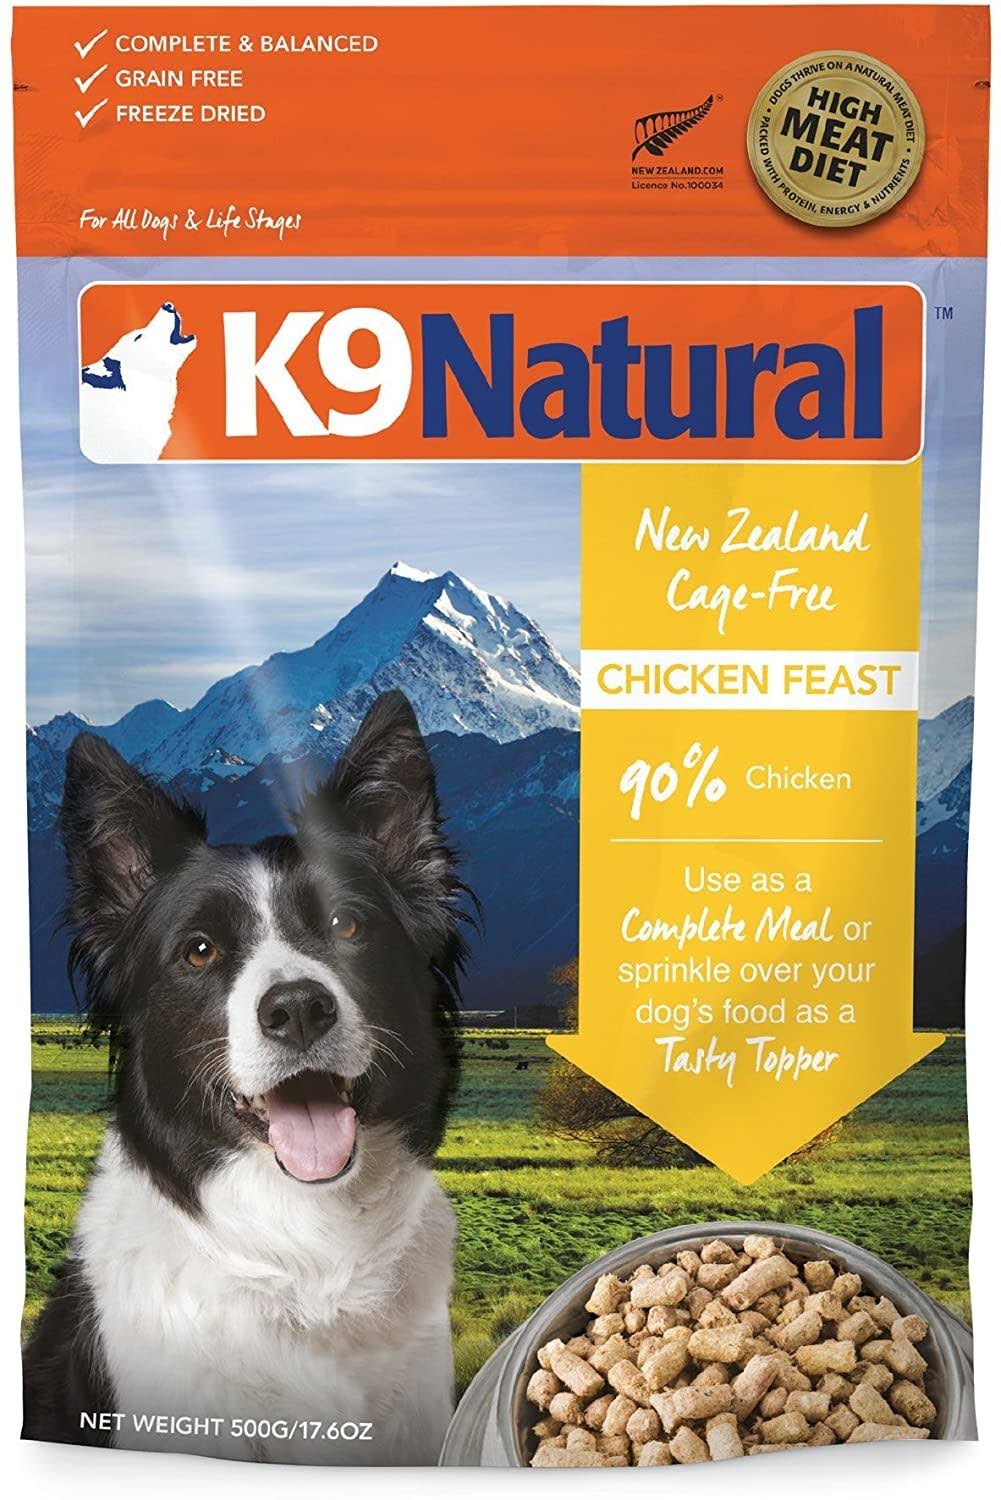 K9 Natural Freeze Dried Dog Food - Chicken Feast, 2.2lbs